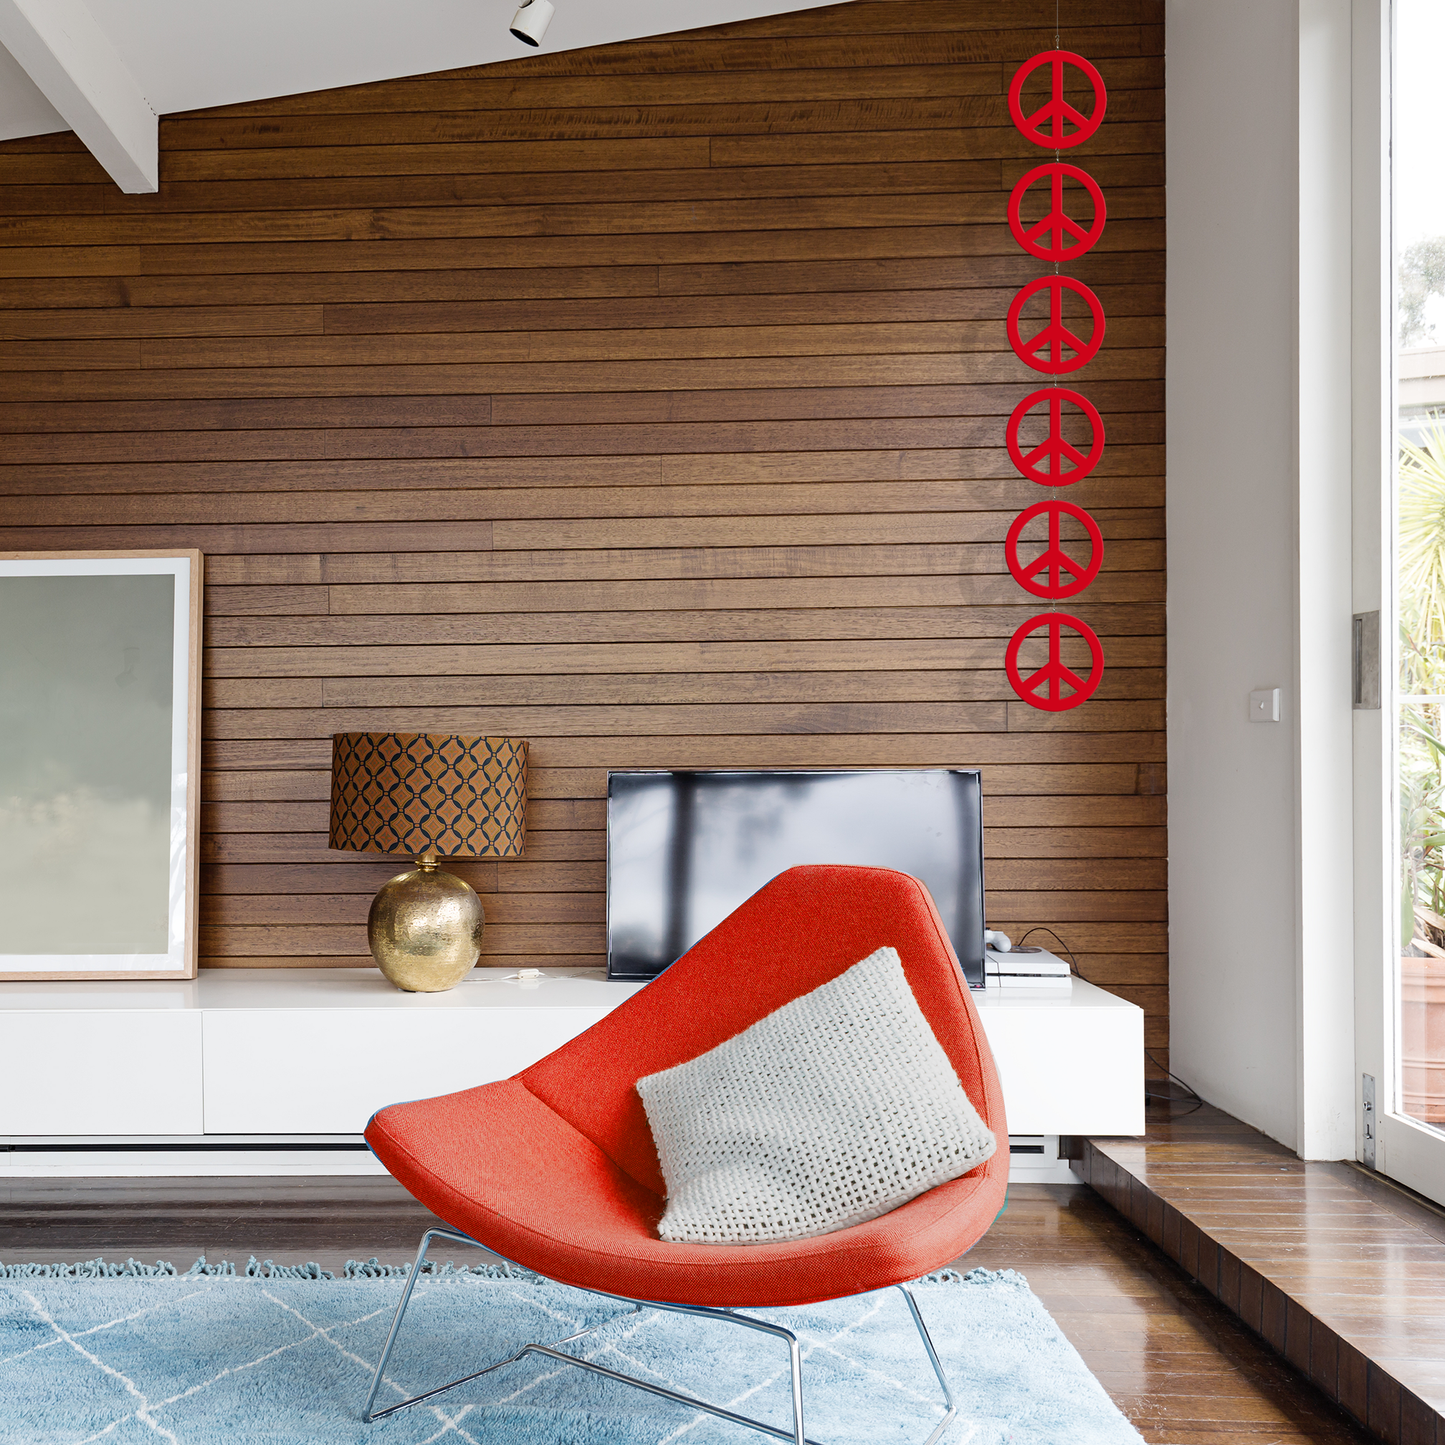 Modern living room with wood paneled wall and mid century modern red chair with Peace Mobile - hanging kinetic art mobile in red by AtomicMobiles.com